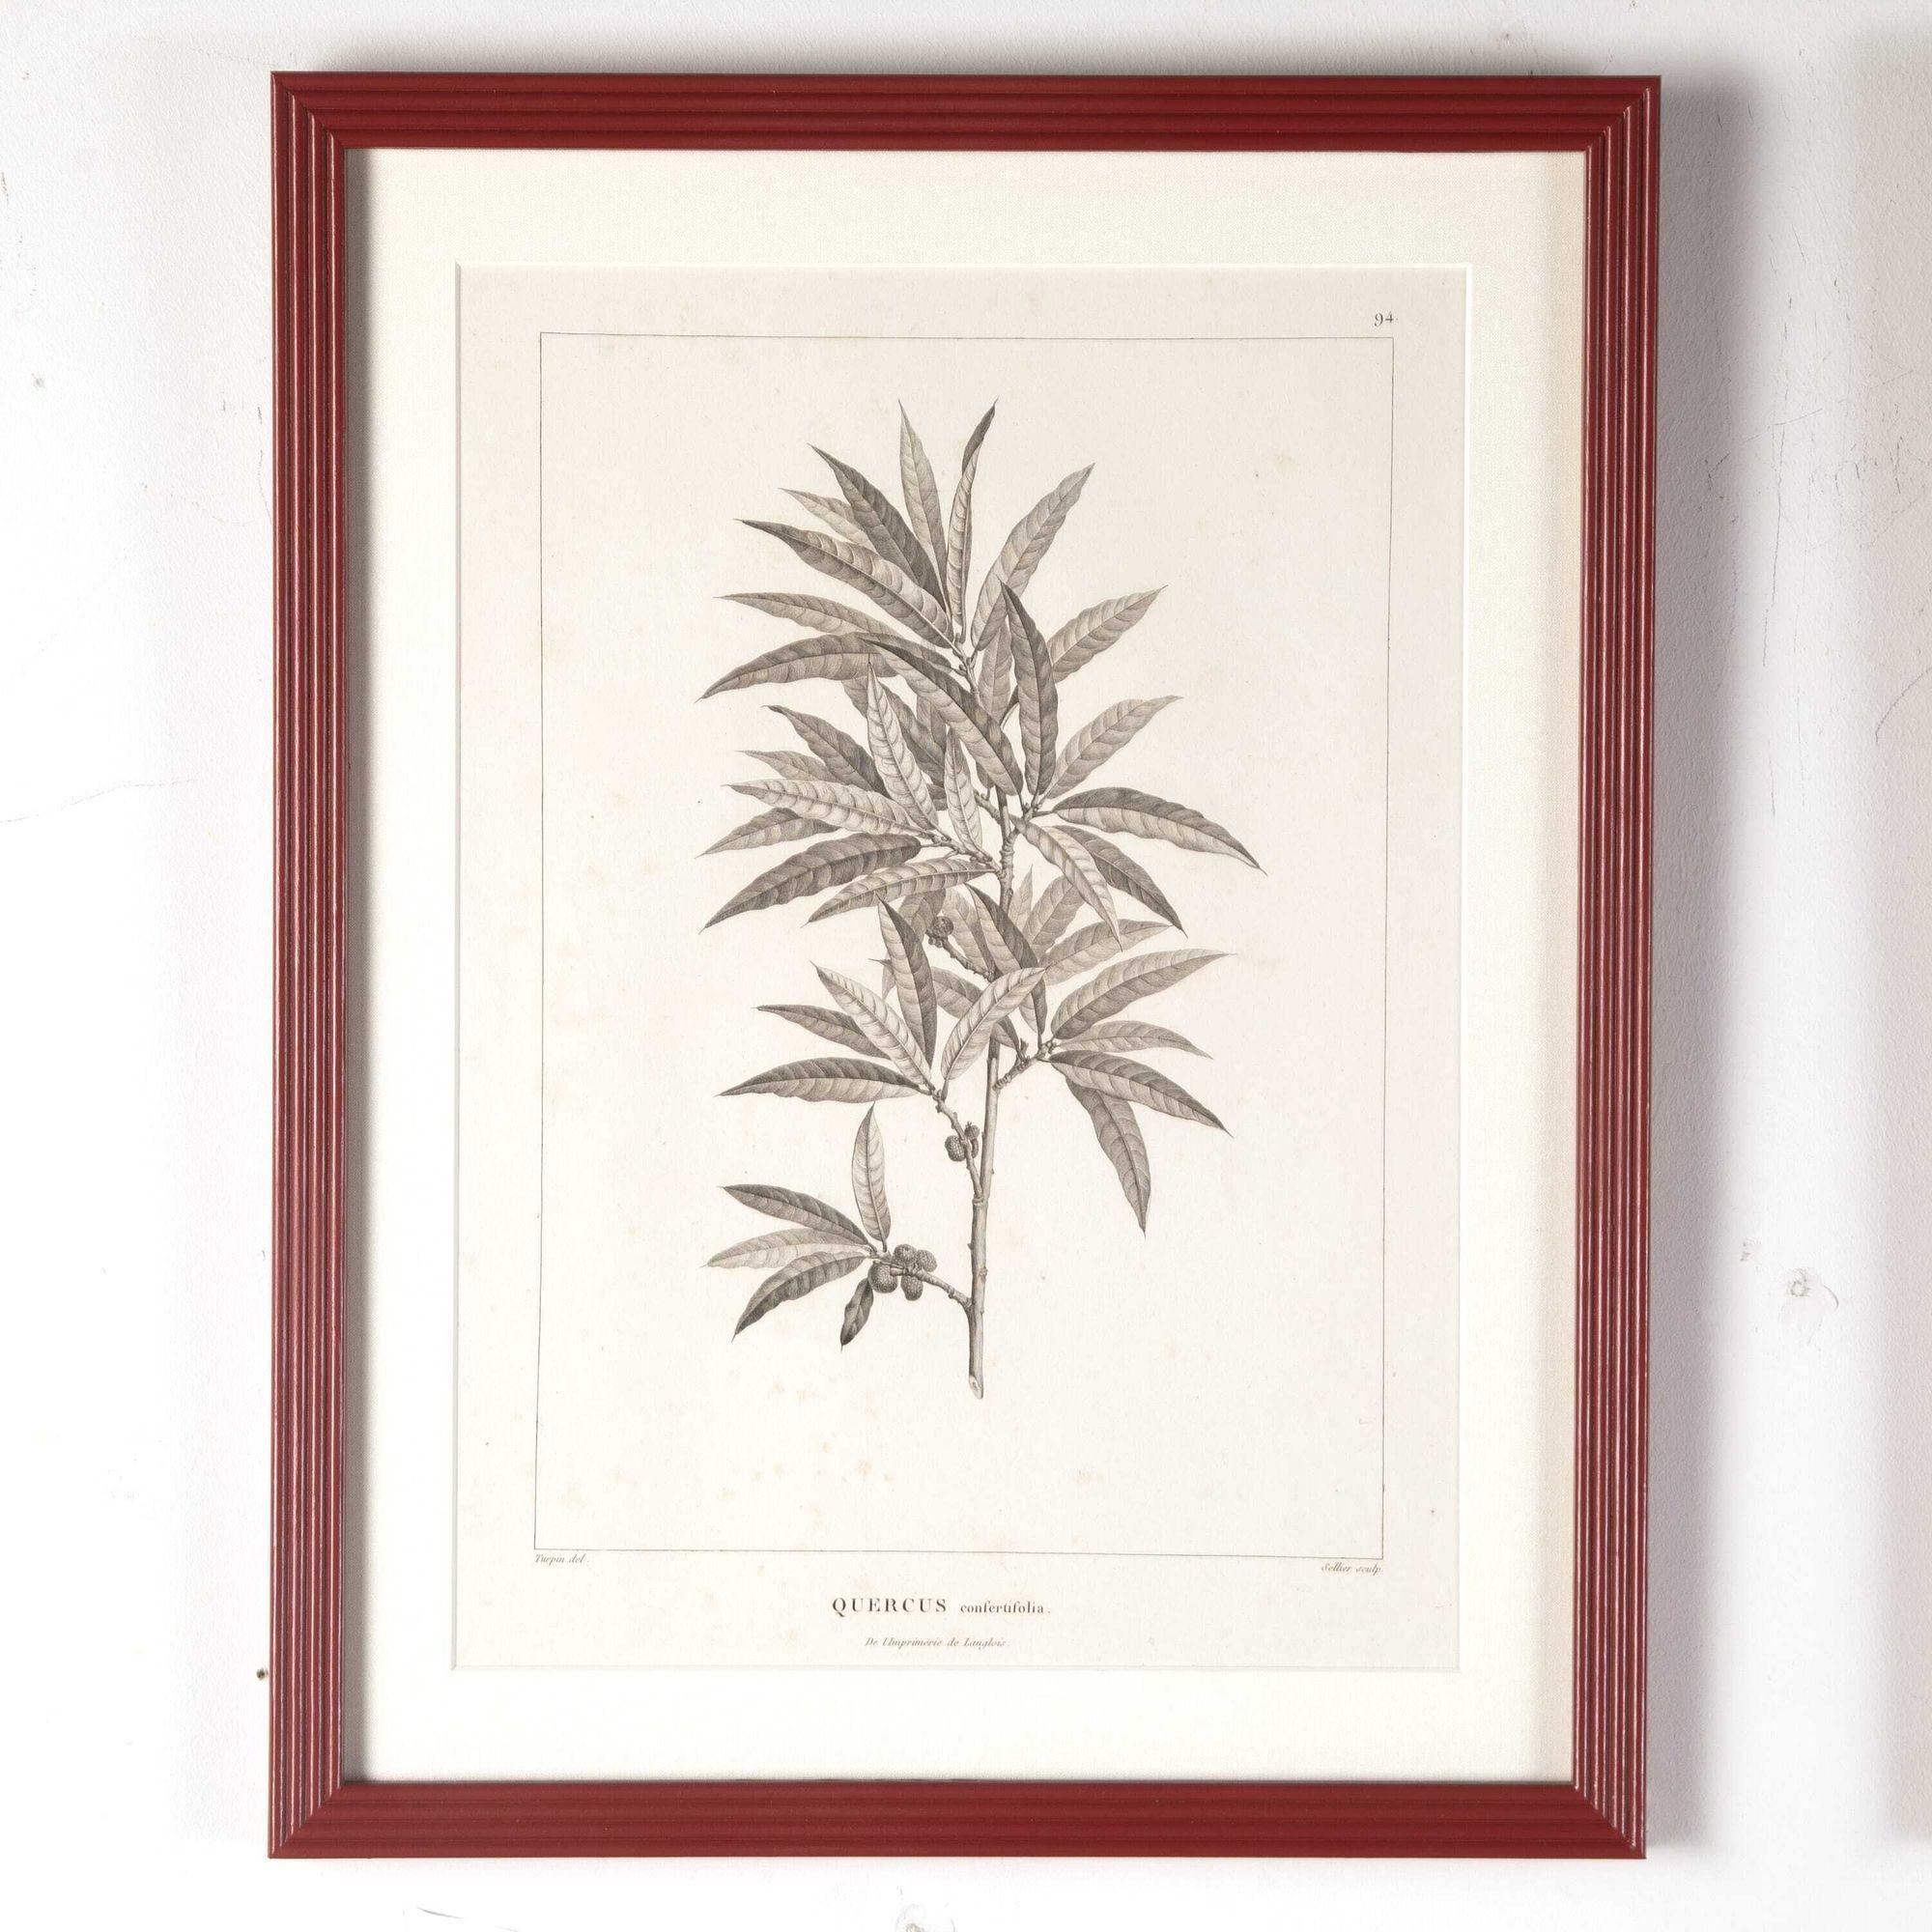 Set of six early 19th Century French botanical stipple engravings.
These engravings were printed by Langlois, a master printer who worked with Redoute.
This beautiful collection is mounted within hand-painted and lacquered reeded frames with